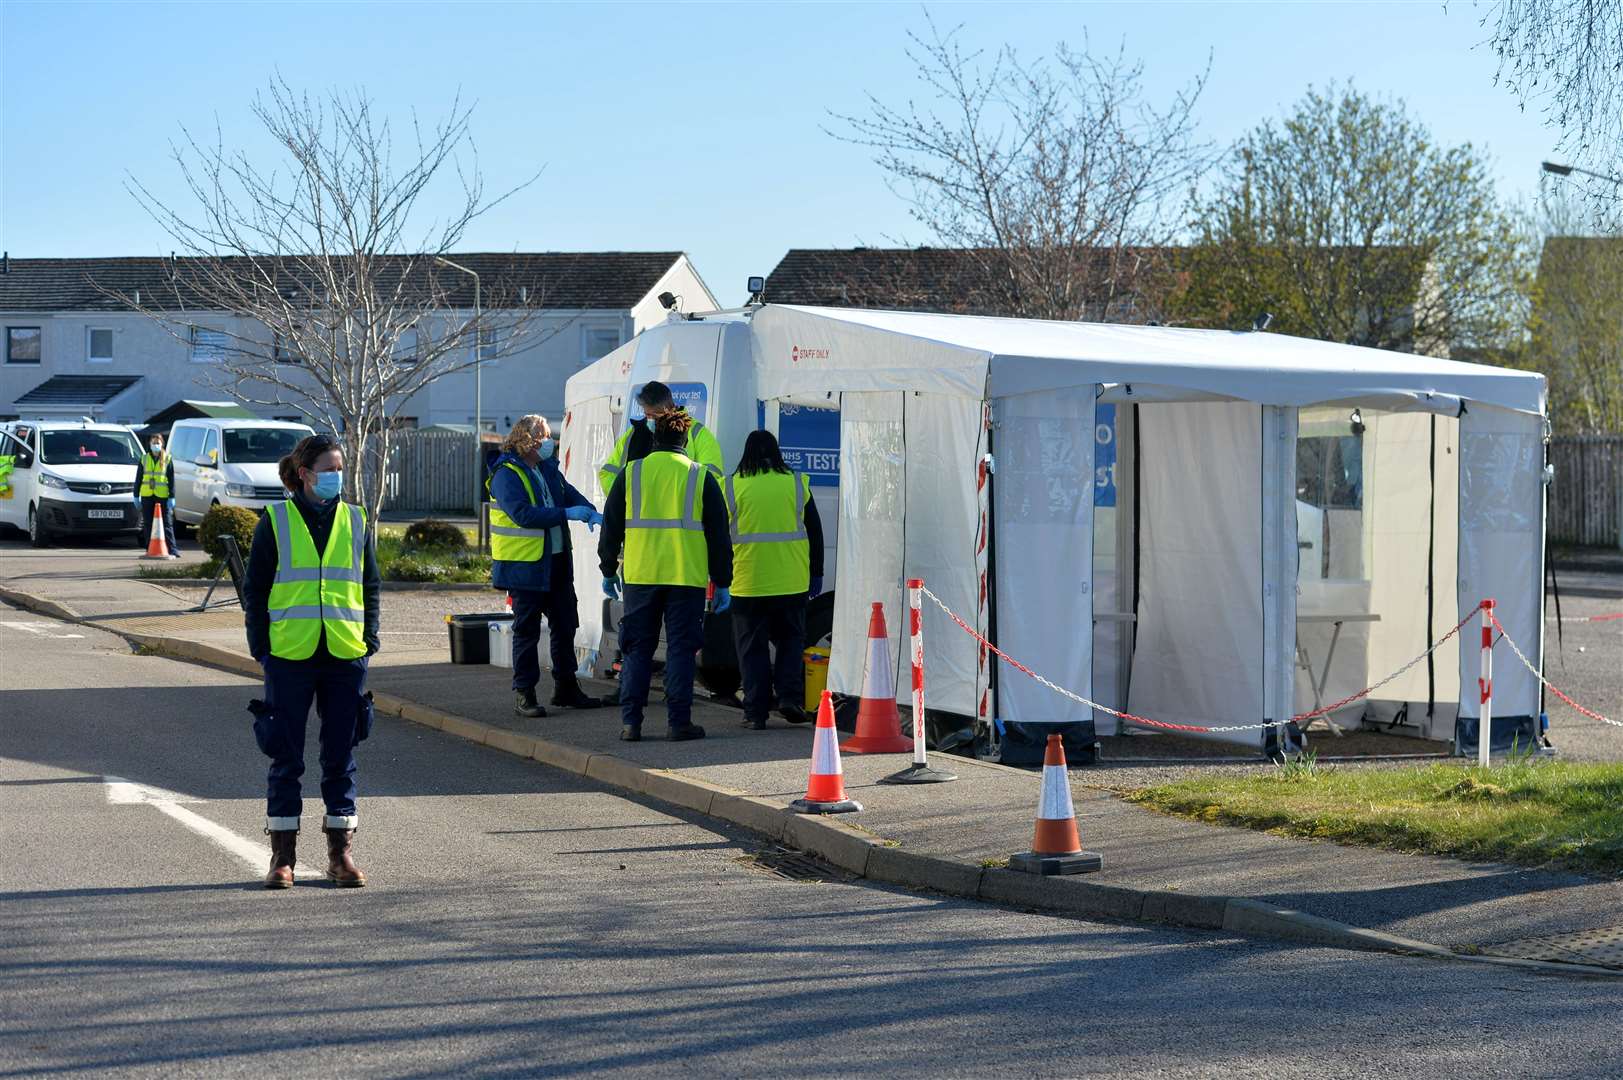 Staff at the mobile testing unit in the car park of Merkinch Community Centre.